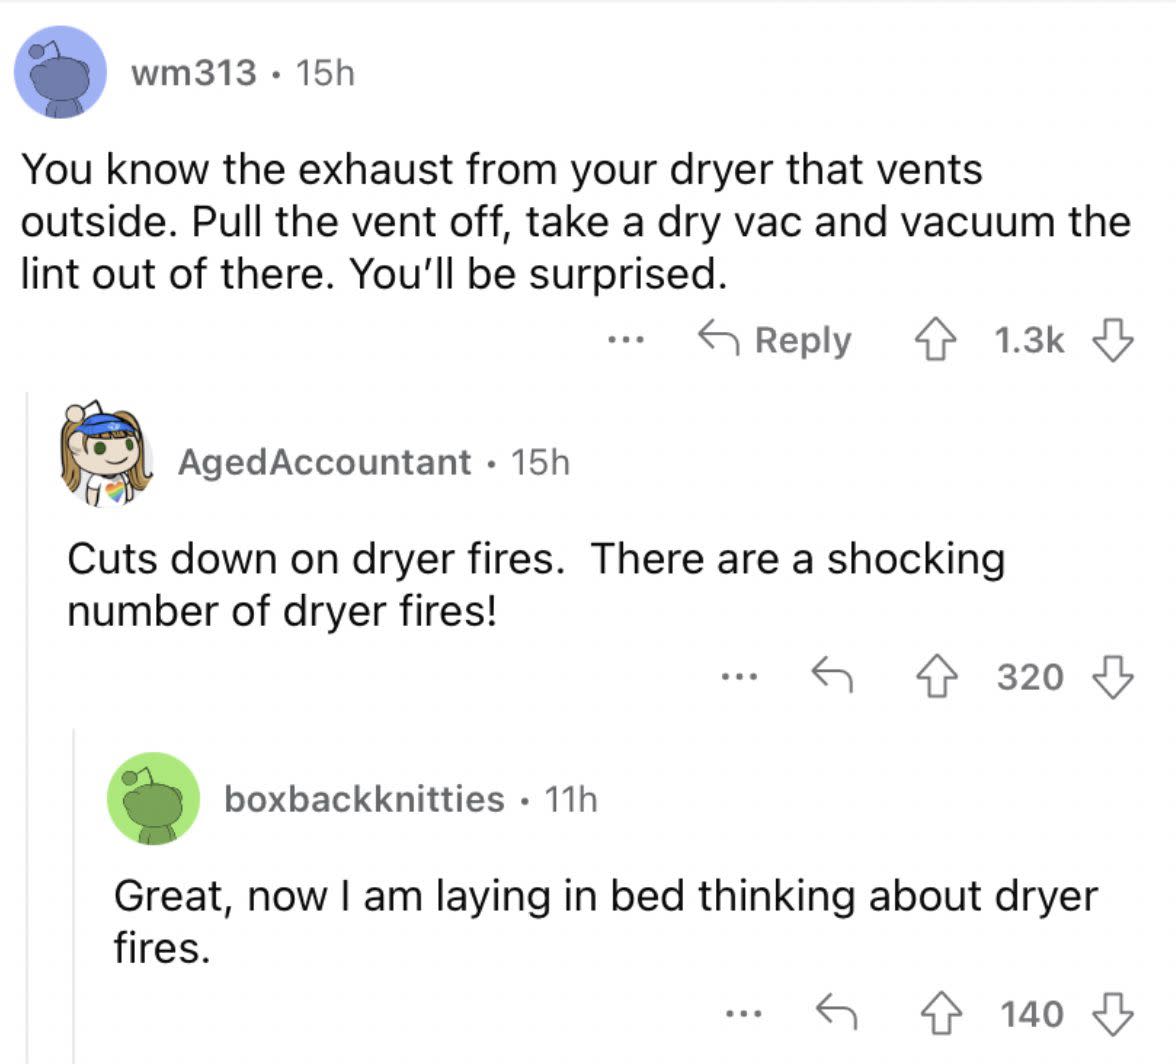 Reddit screenshot about the value of cleaning out your dryer vents of lint.